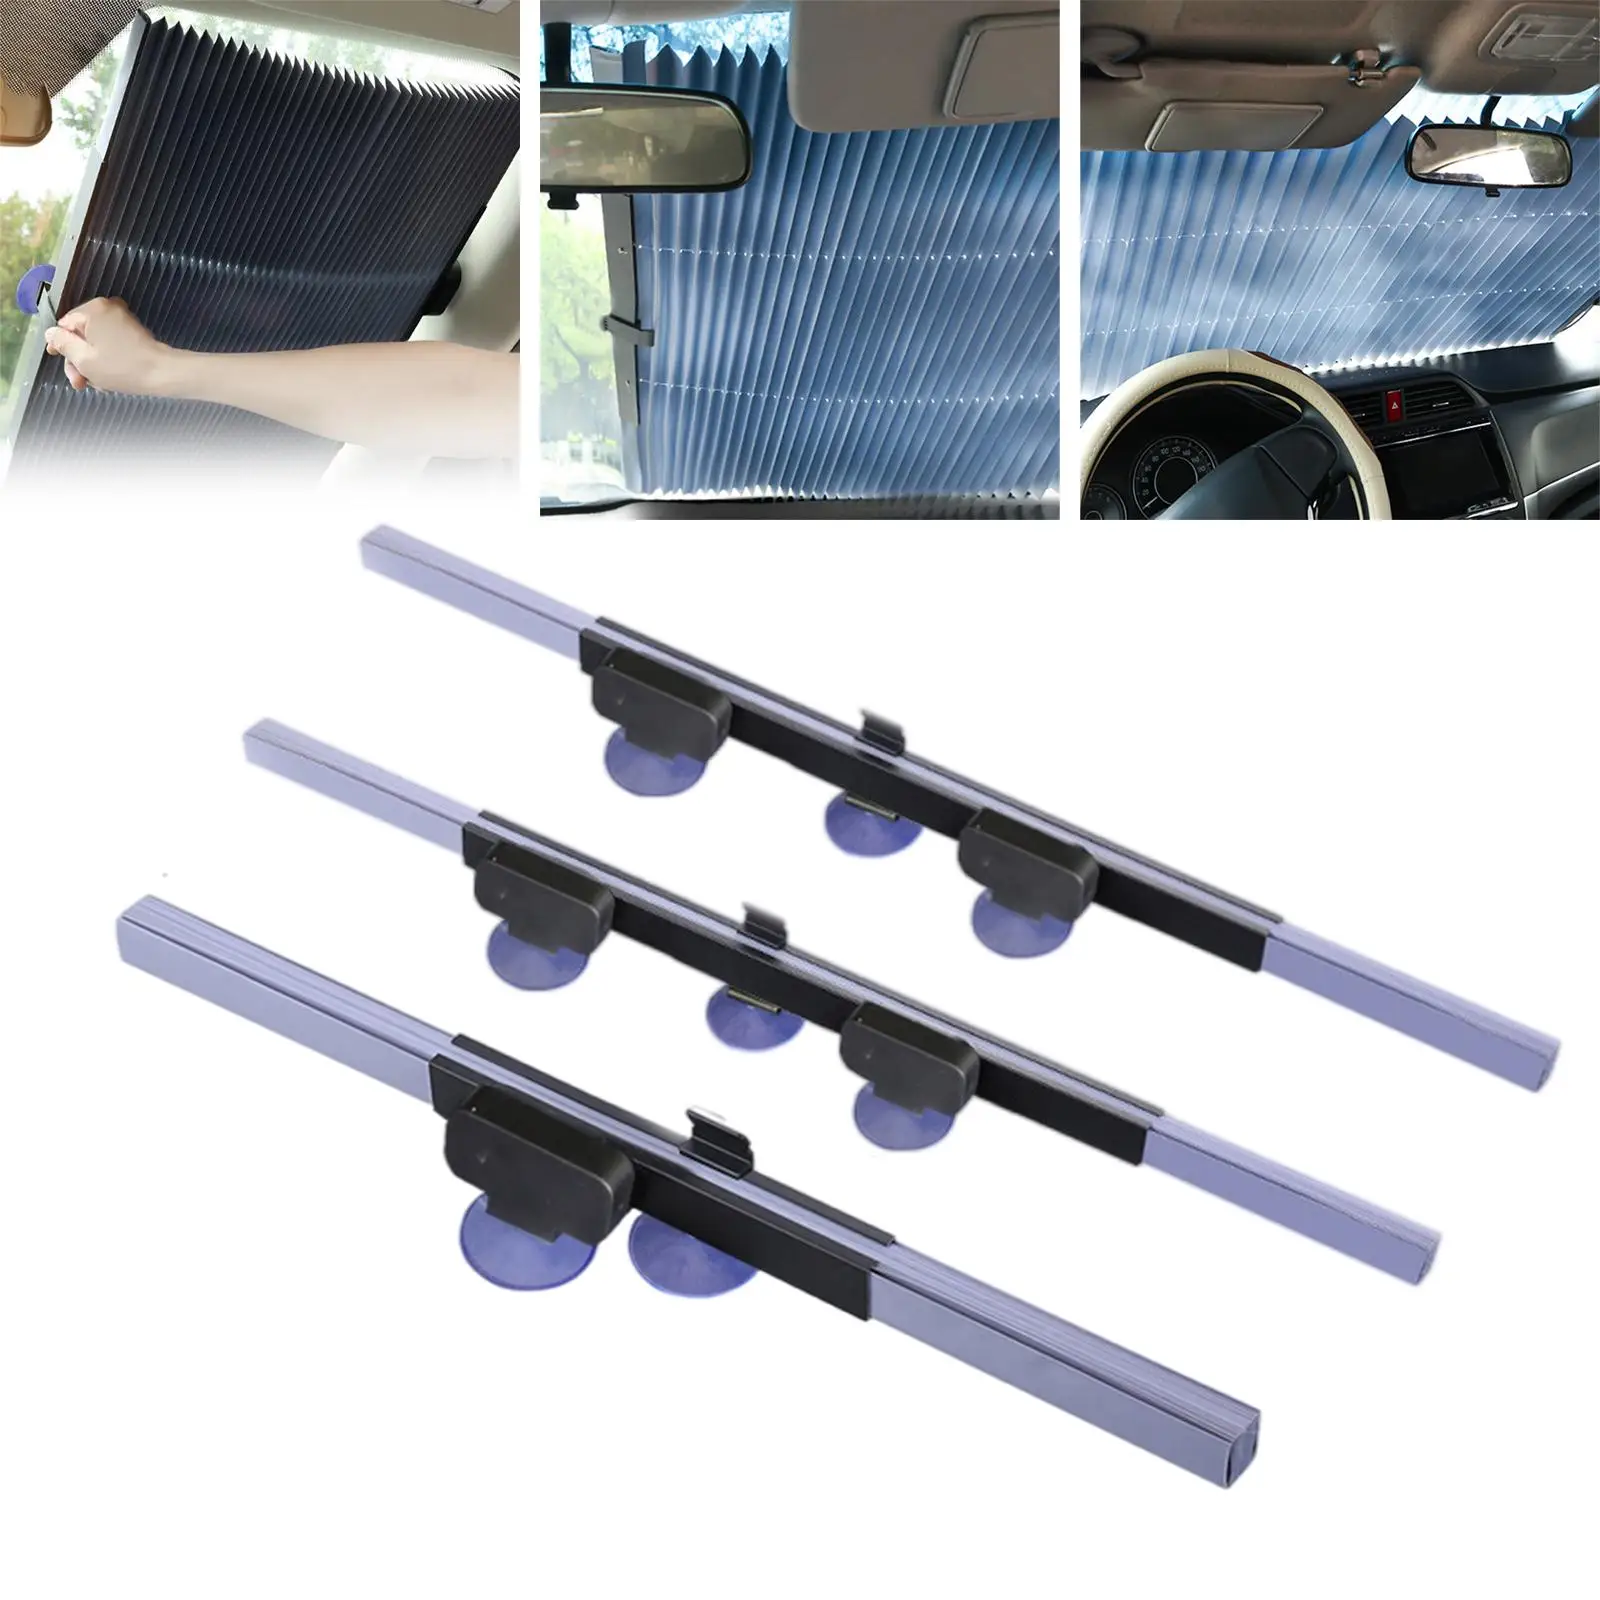 Windshield Sunshade Anti-Ultraviolet Car Window Shade Fit for All Cars Various Models